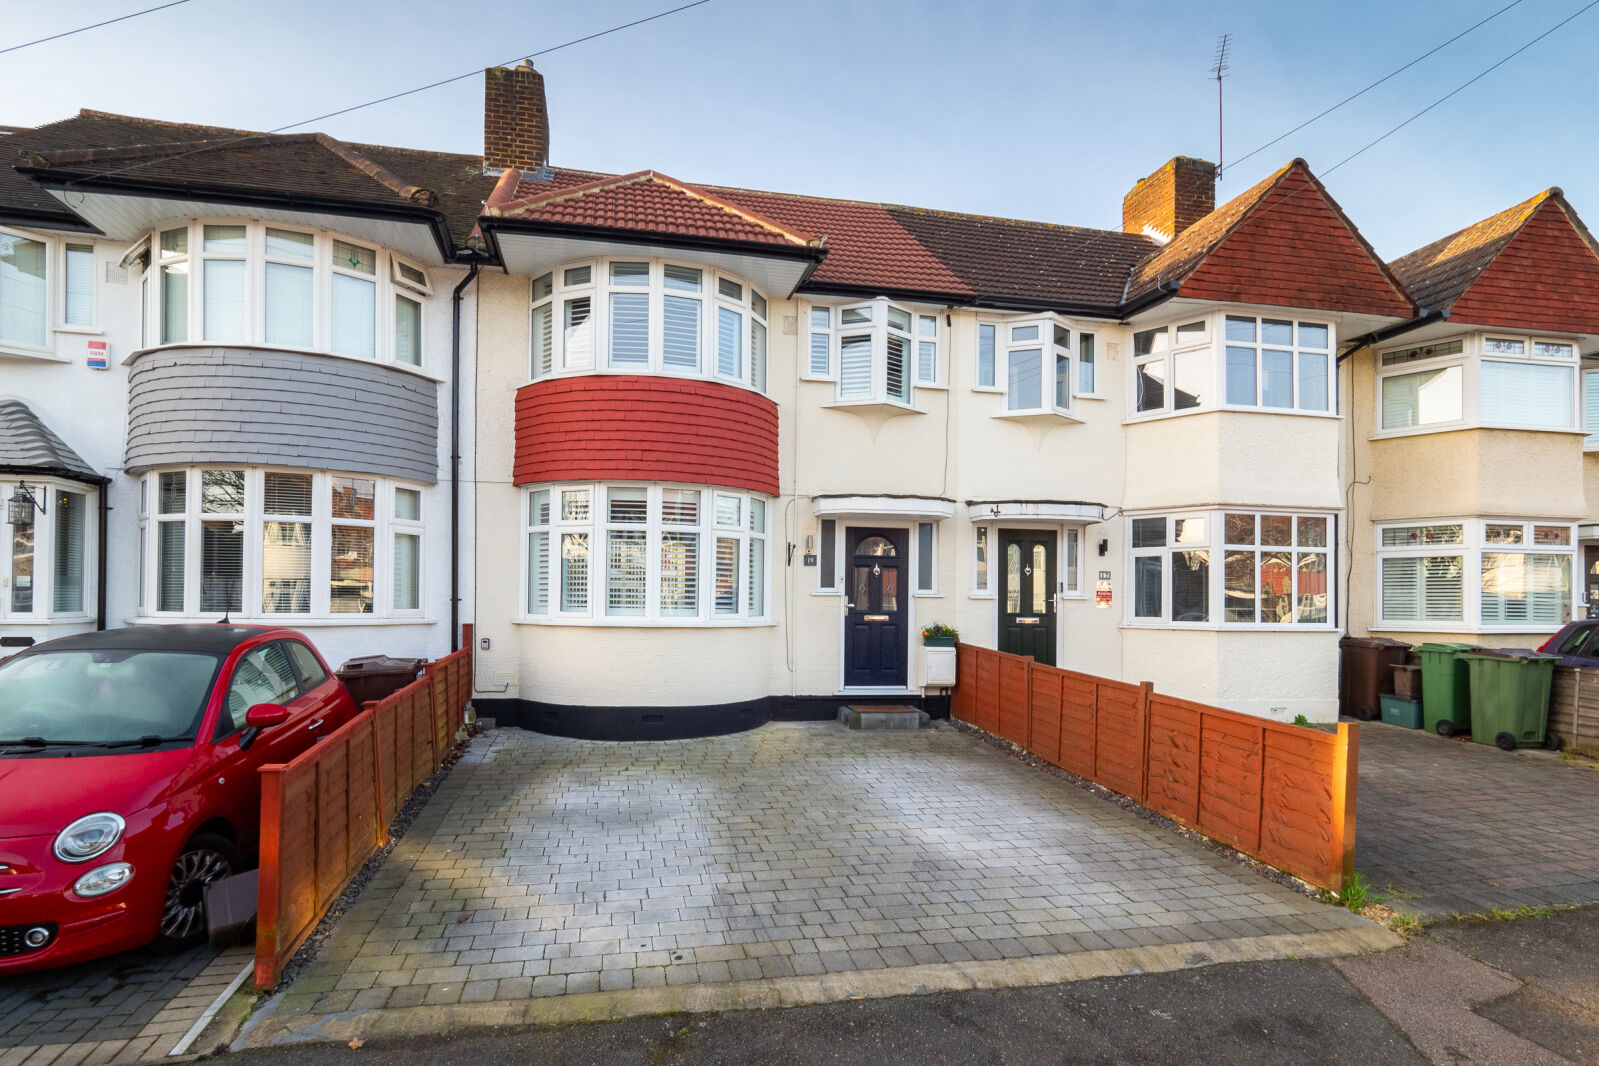 3 bedroom mid terraced house for sale Hill Top, Sutton, SM3, main image